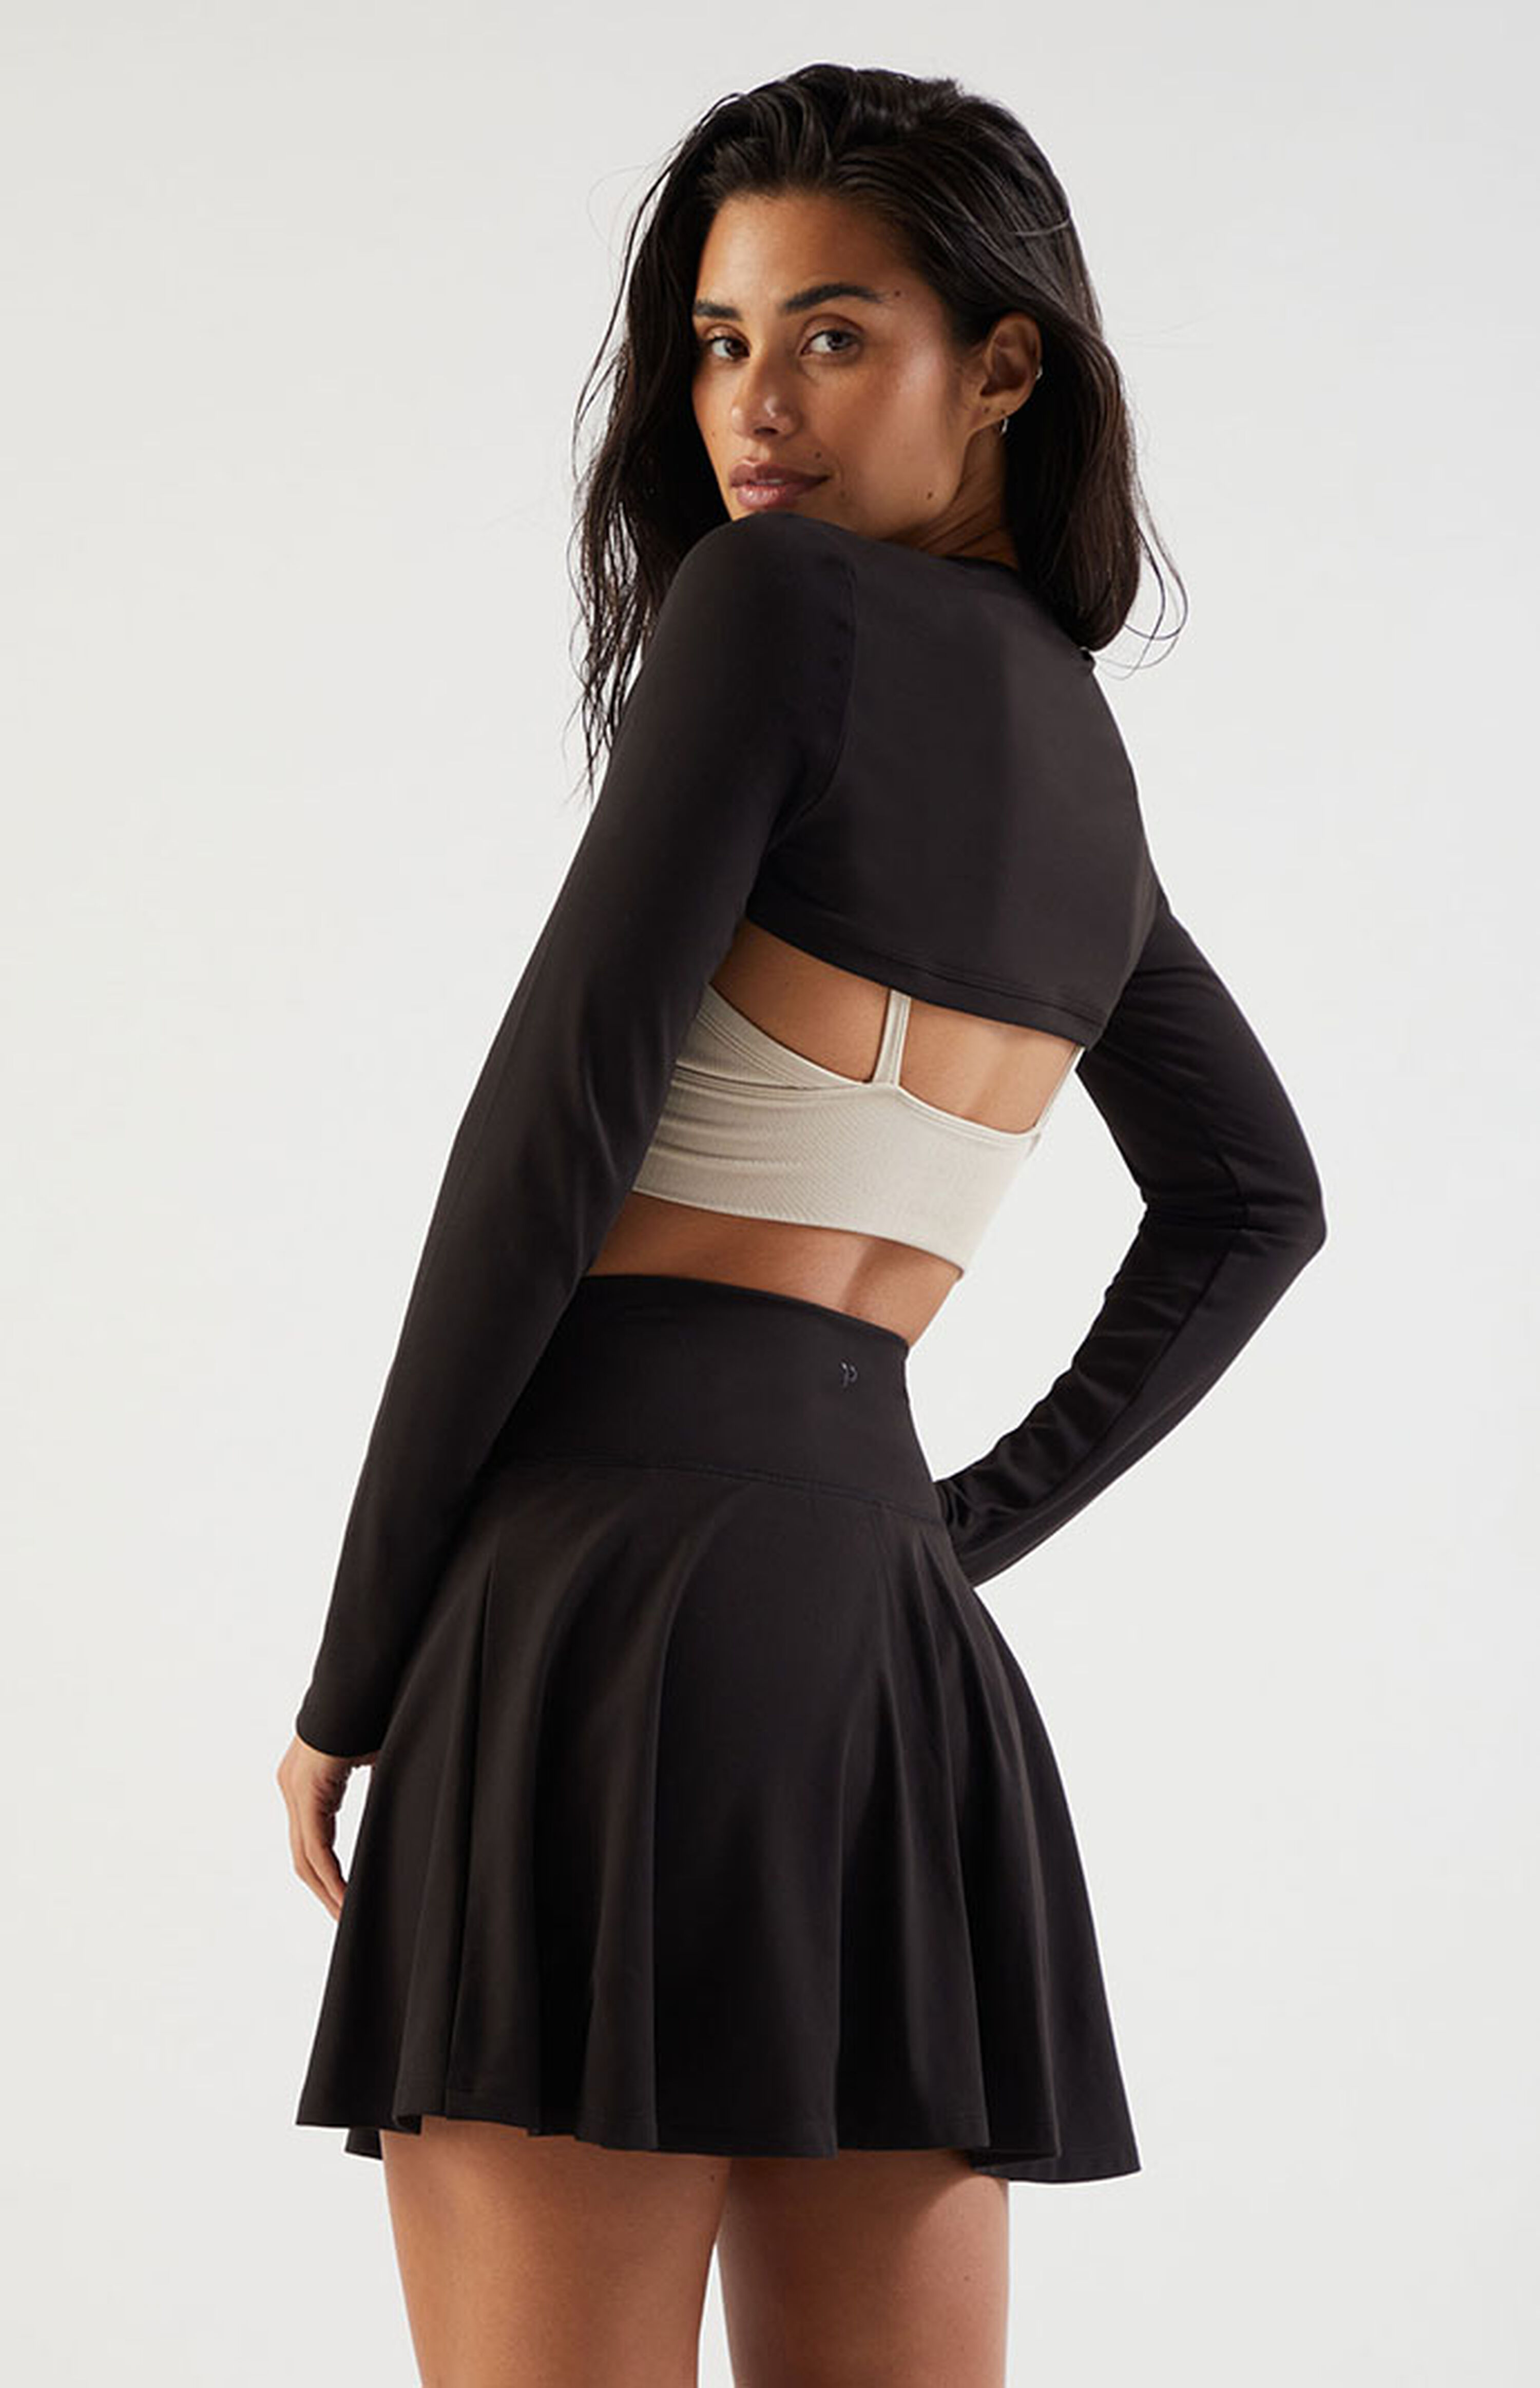 PAC 1980 PAC WHISPER Black Active Crossover Front Mini Skirt | PacSun